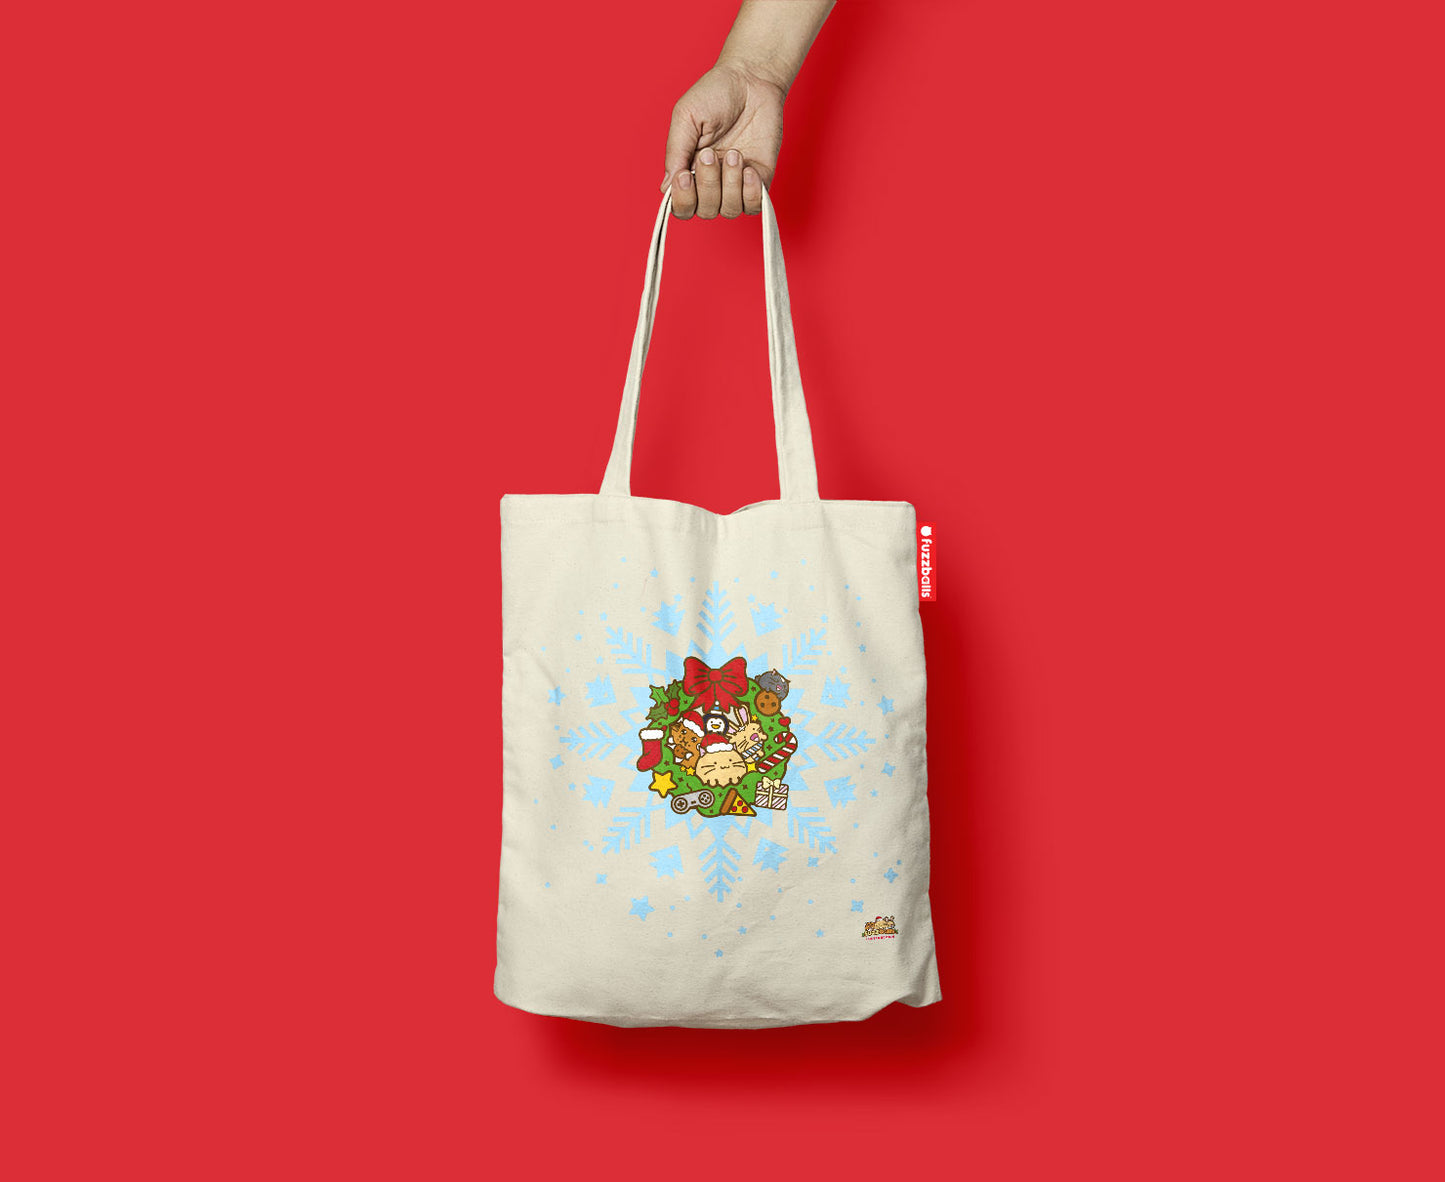 Snowflake Wreath Limited Edition Tote Bag